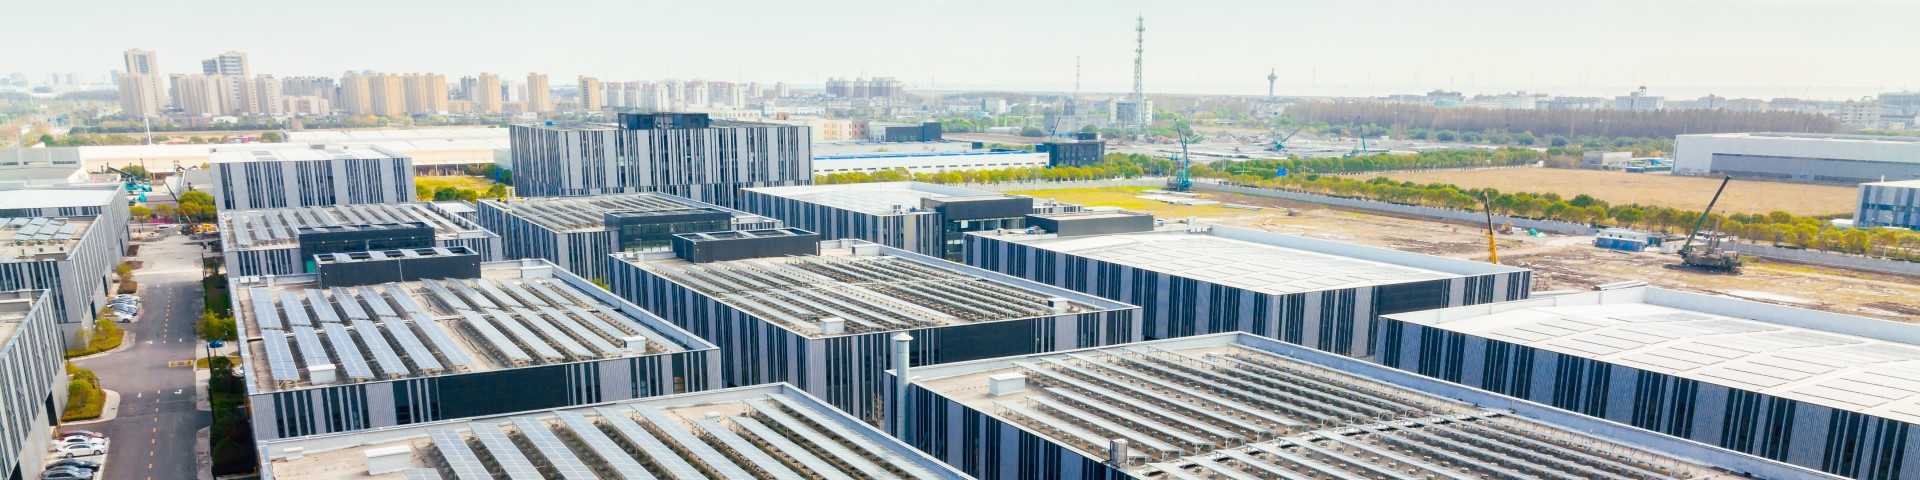 Aerial view of solar panels on a factory roof